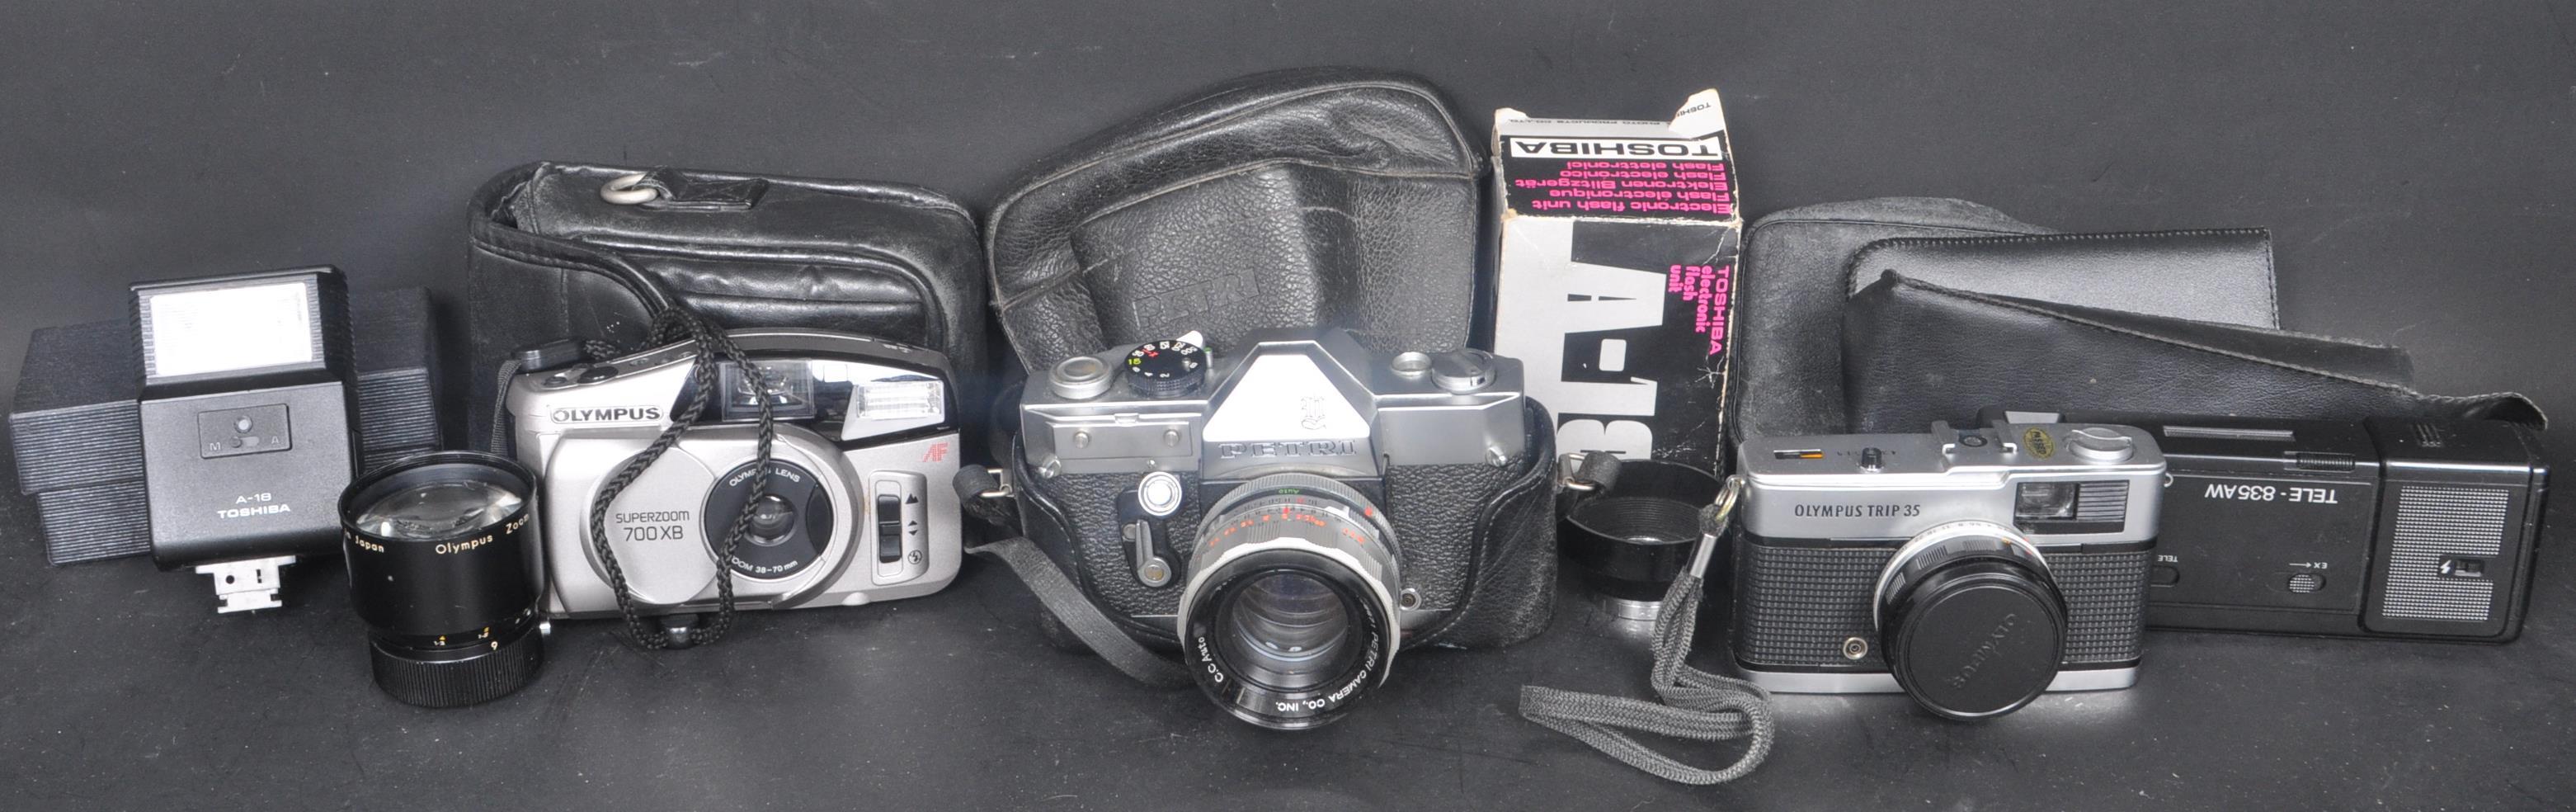 COLLECTION OF VINTAGE 20TH CENTURY CAMERA EQUIPMENT